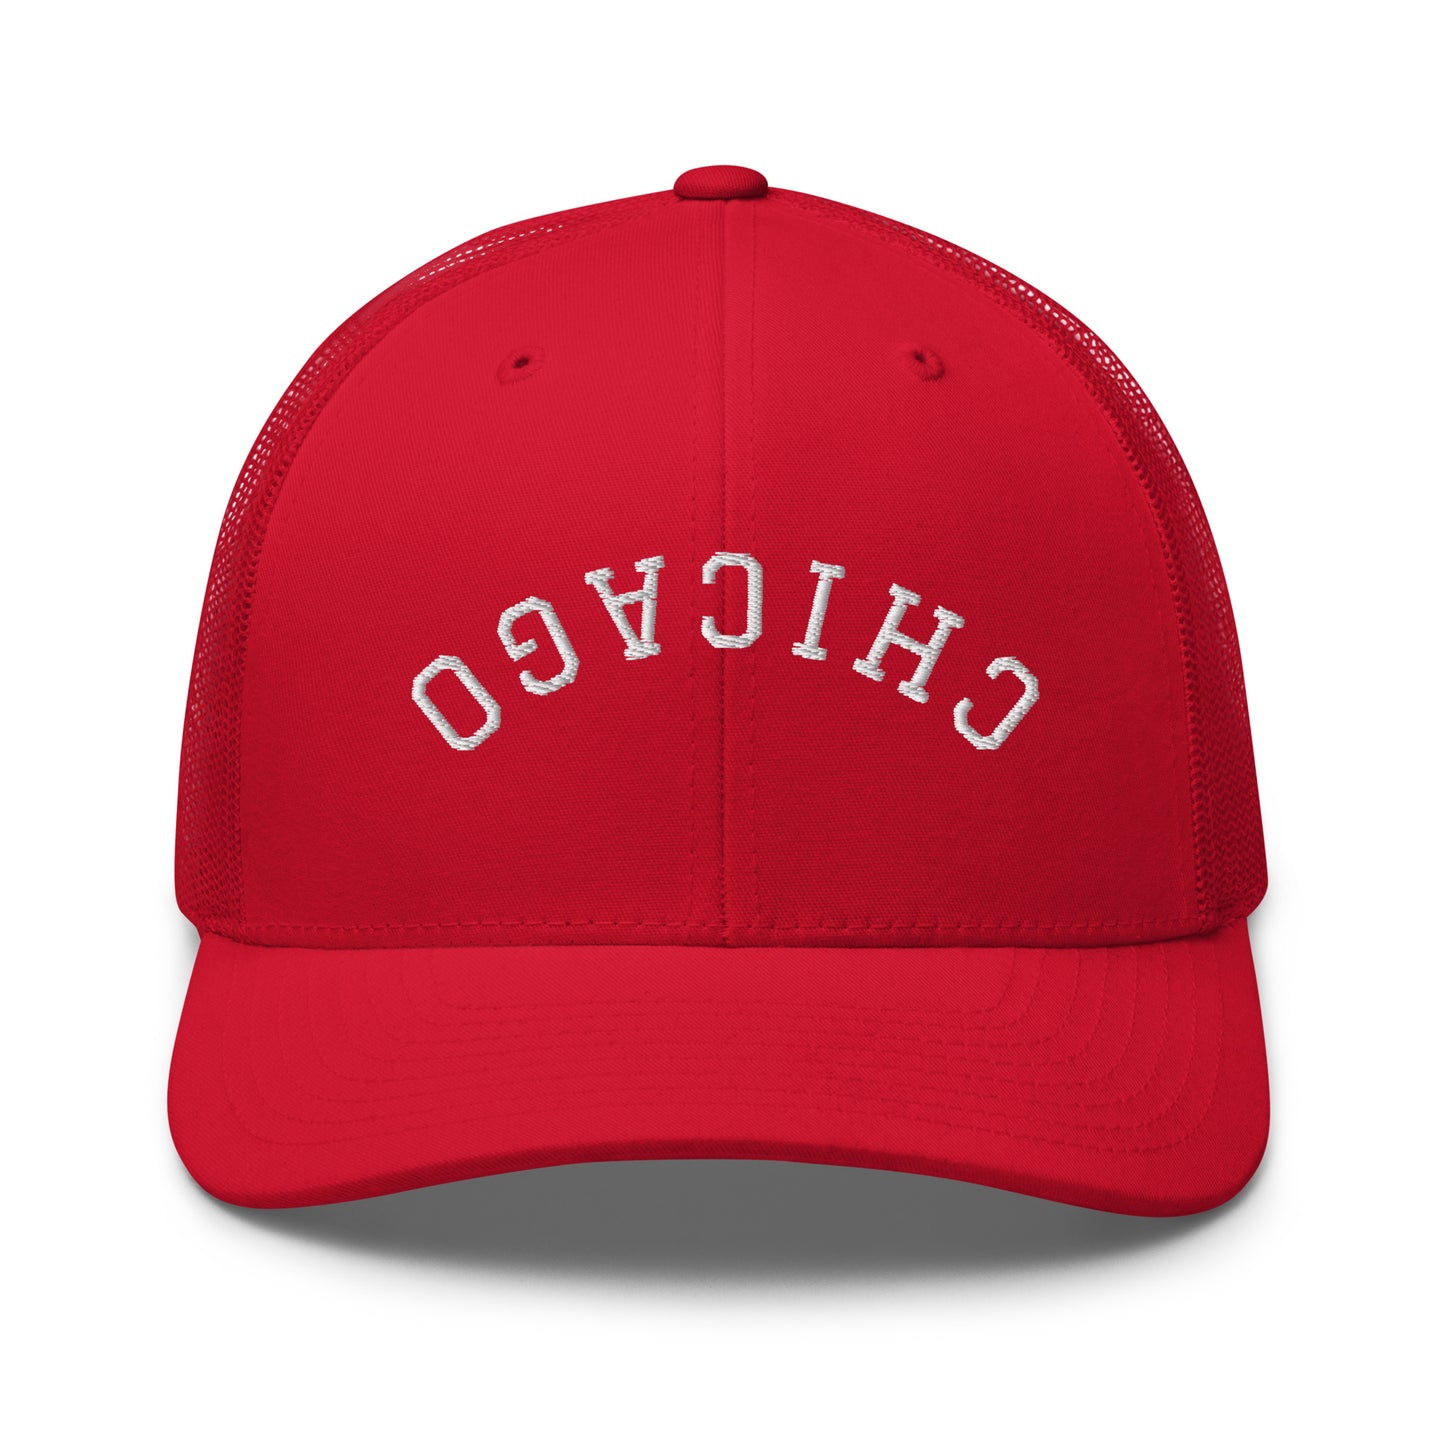 Chicago Upside Down Arch Mid 6 Panel Snapback Trucker Hat